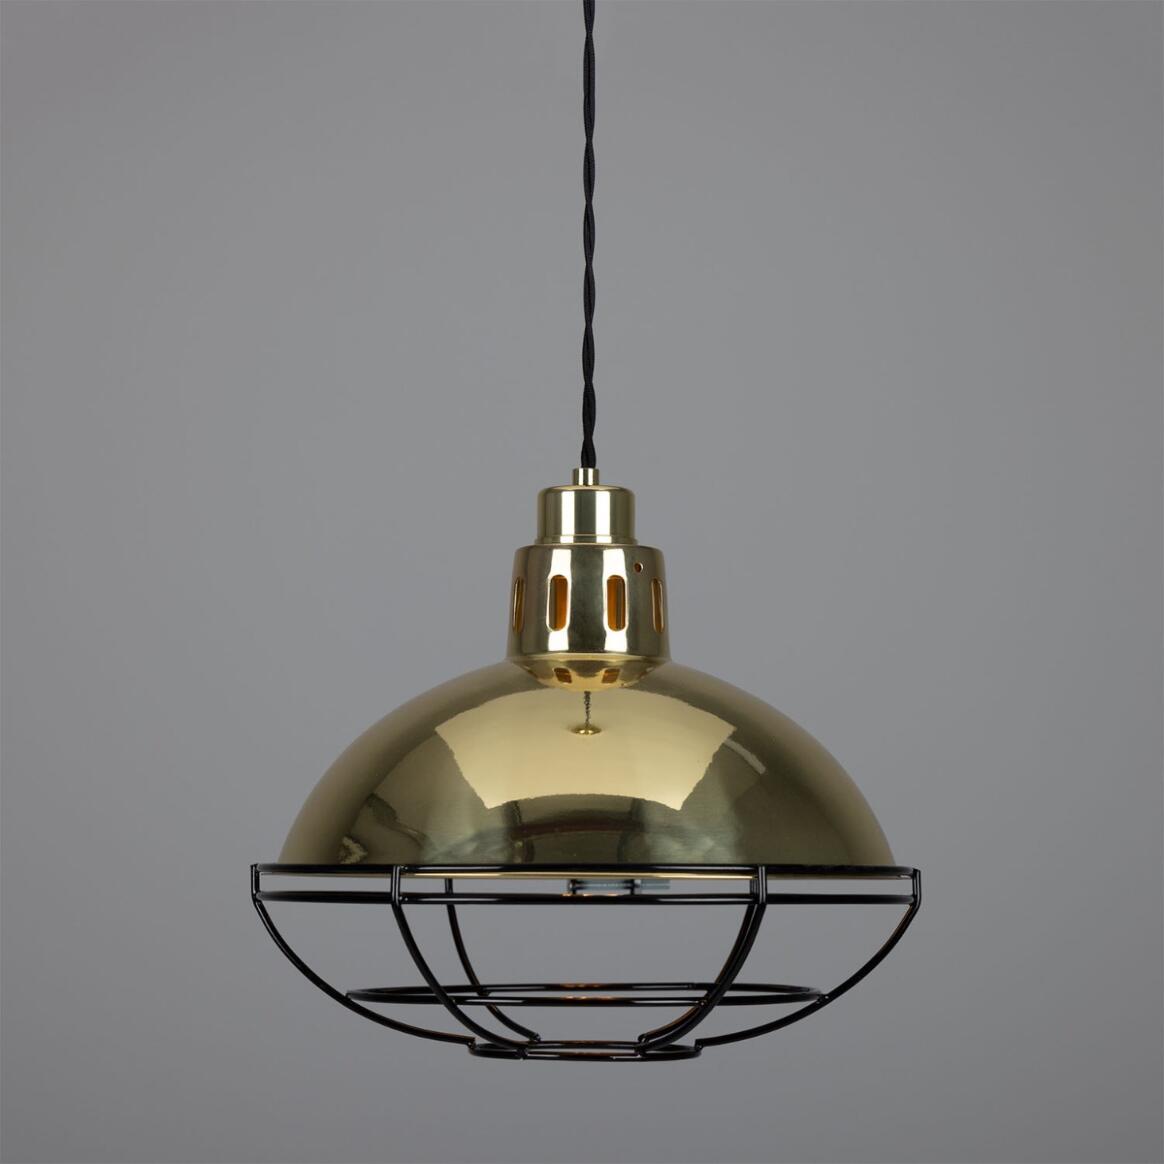 Chester Cage Factory Pendant Light 12.6" main product image